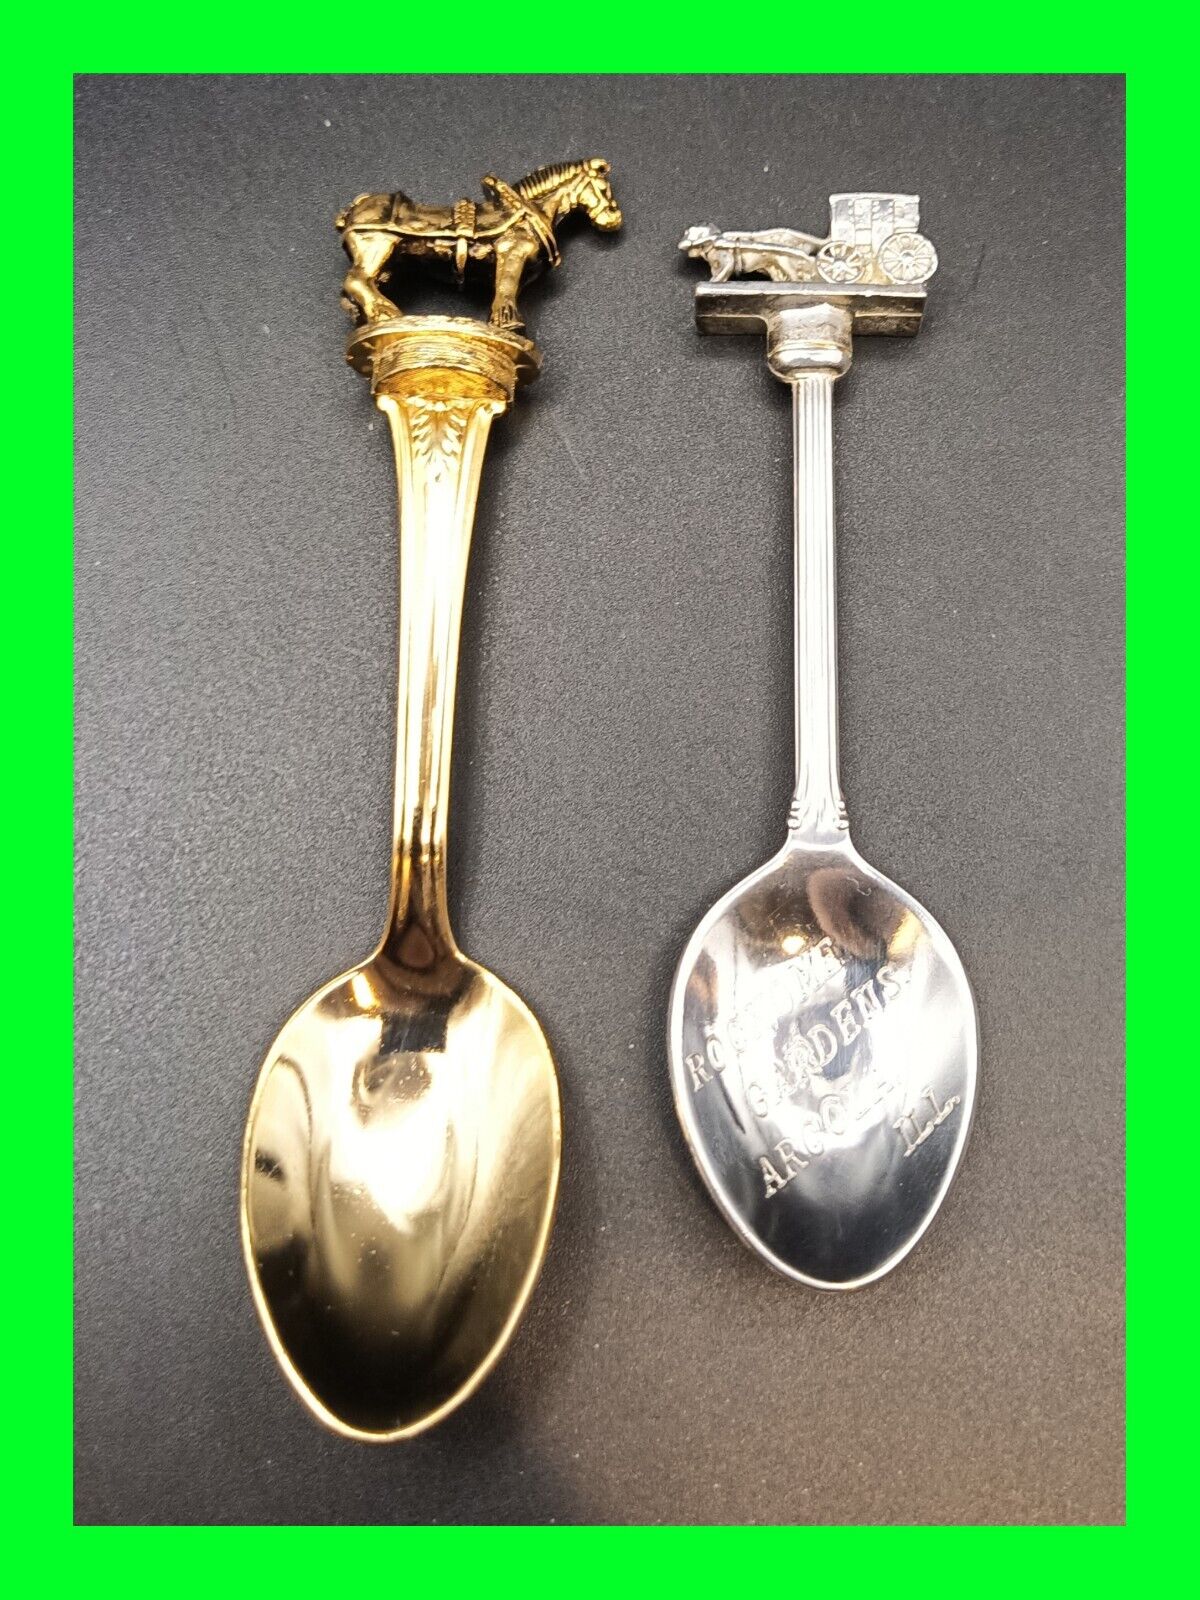 2x Vintage Equestrian Motif Collectable Horse Spoons - Lot Of 2